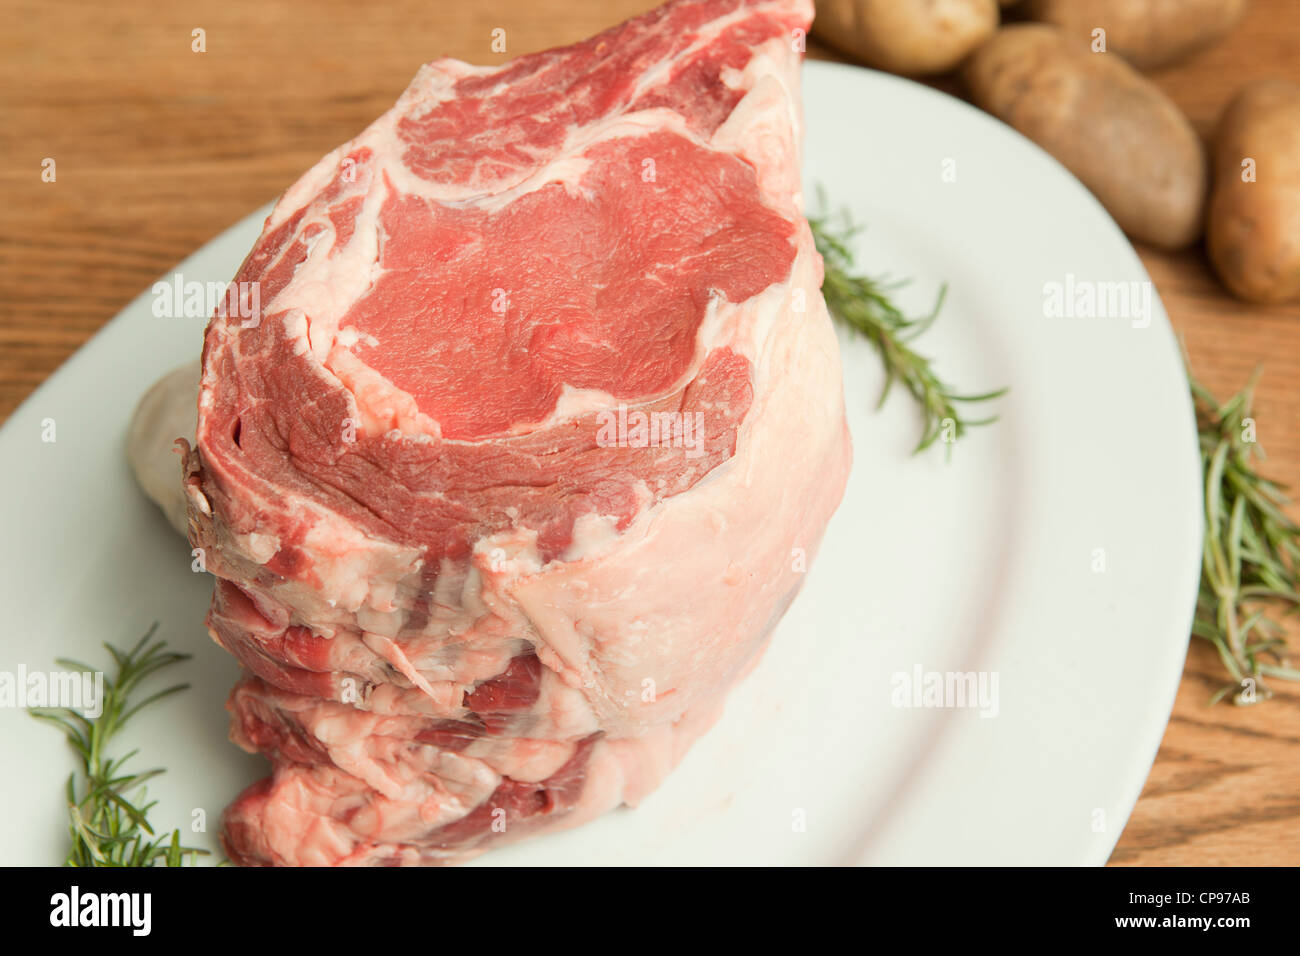 Horizontal view of a large uncooked prime rib roast along with garnishes of herbs, garlic and potatoes Stock Photo